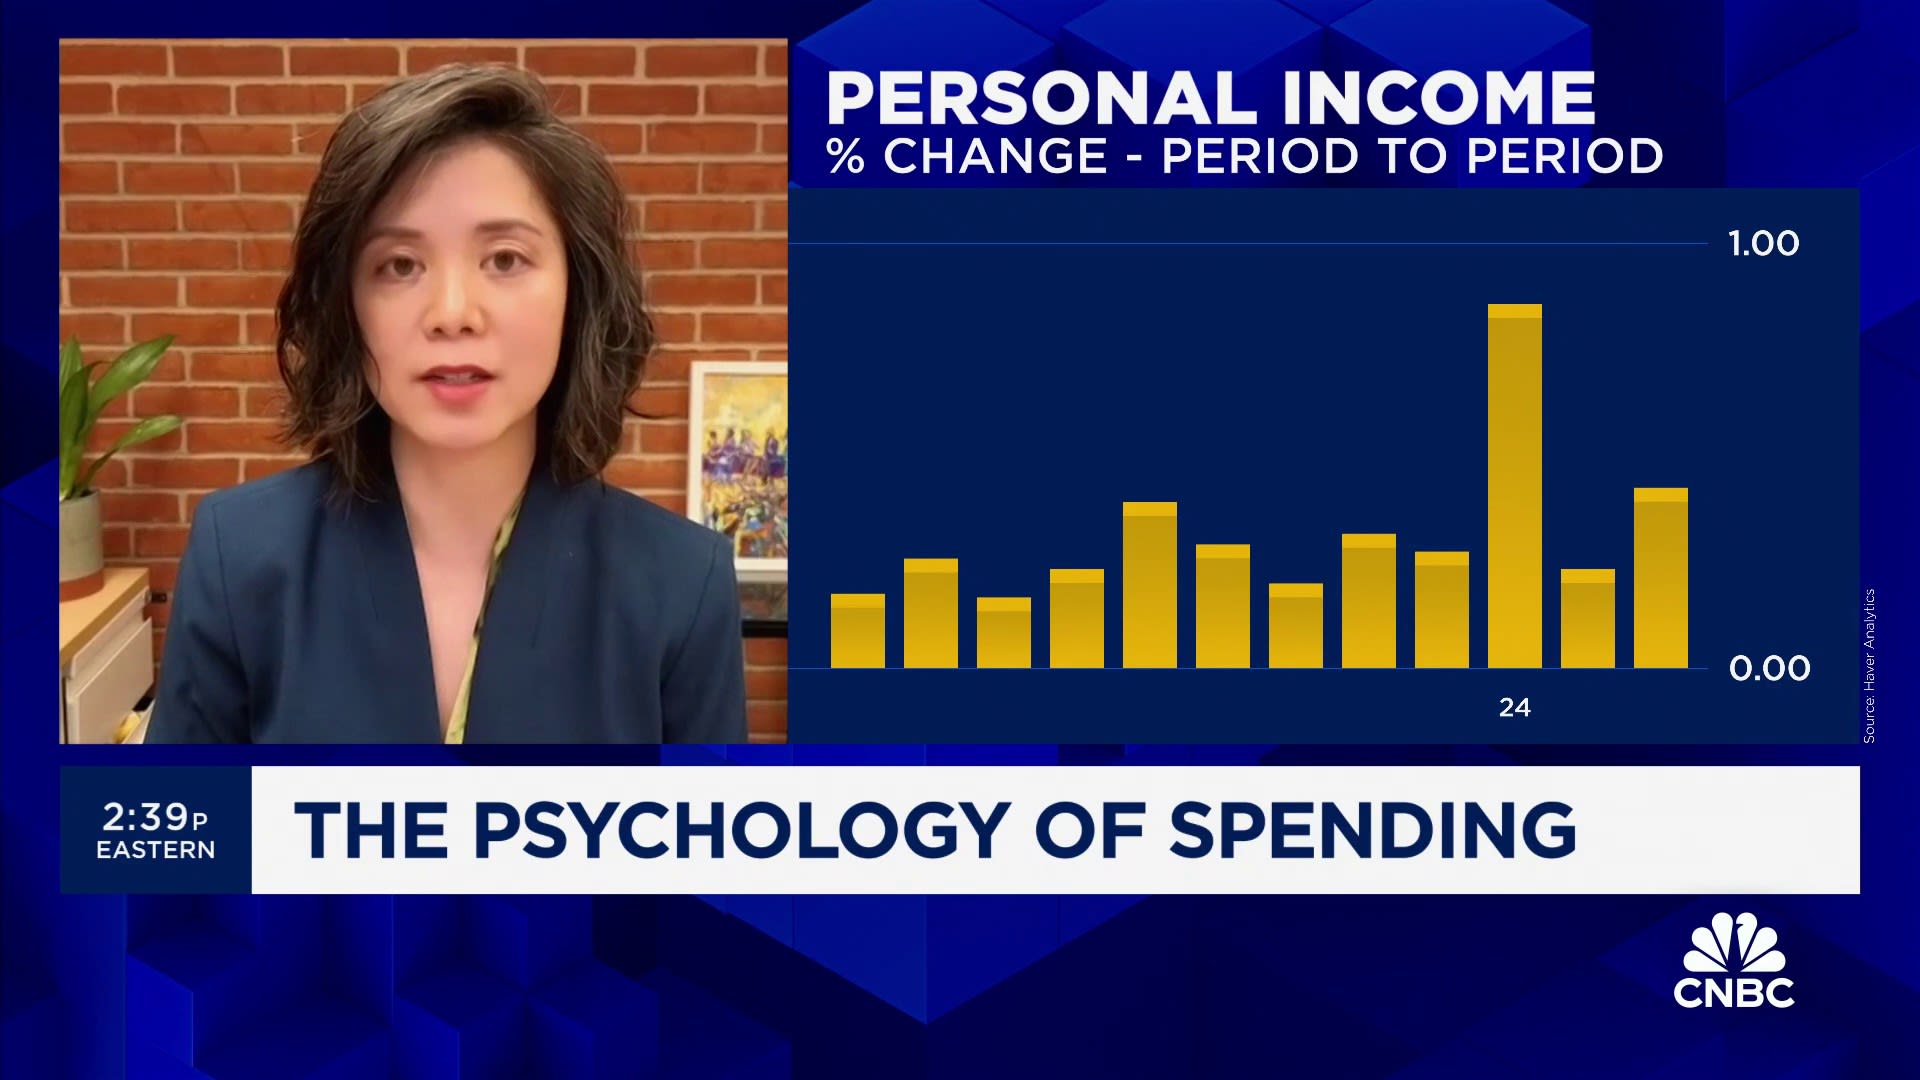 Consumers have given up on long-term saving goals, says University of Michigan's Joanne Hsu